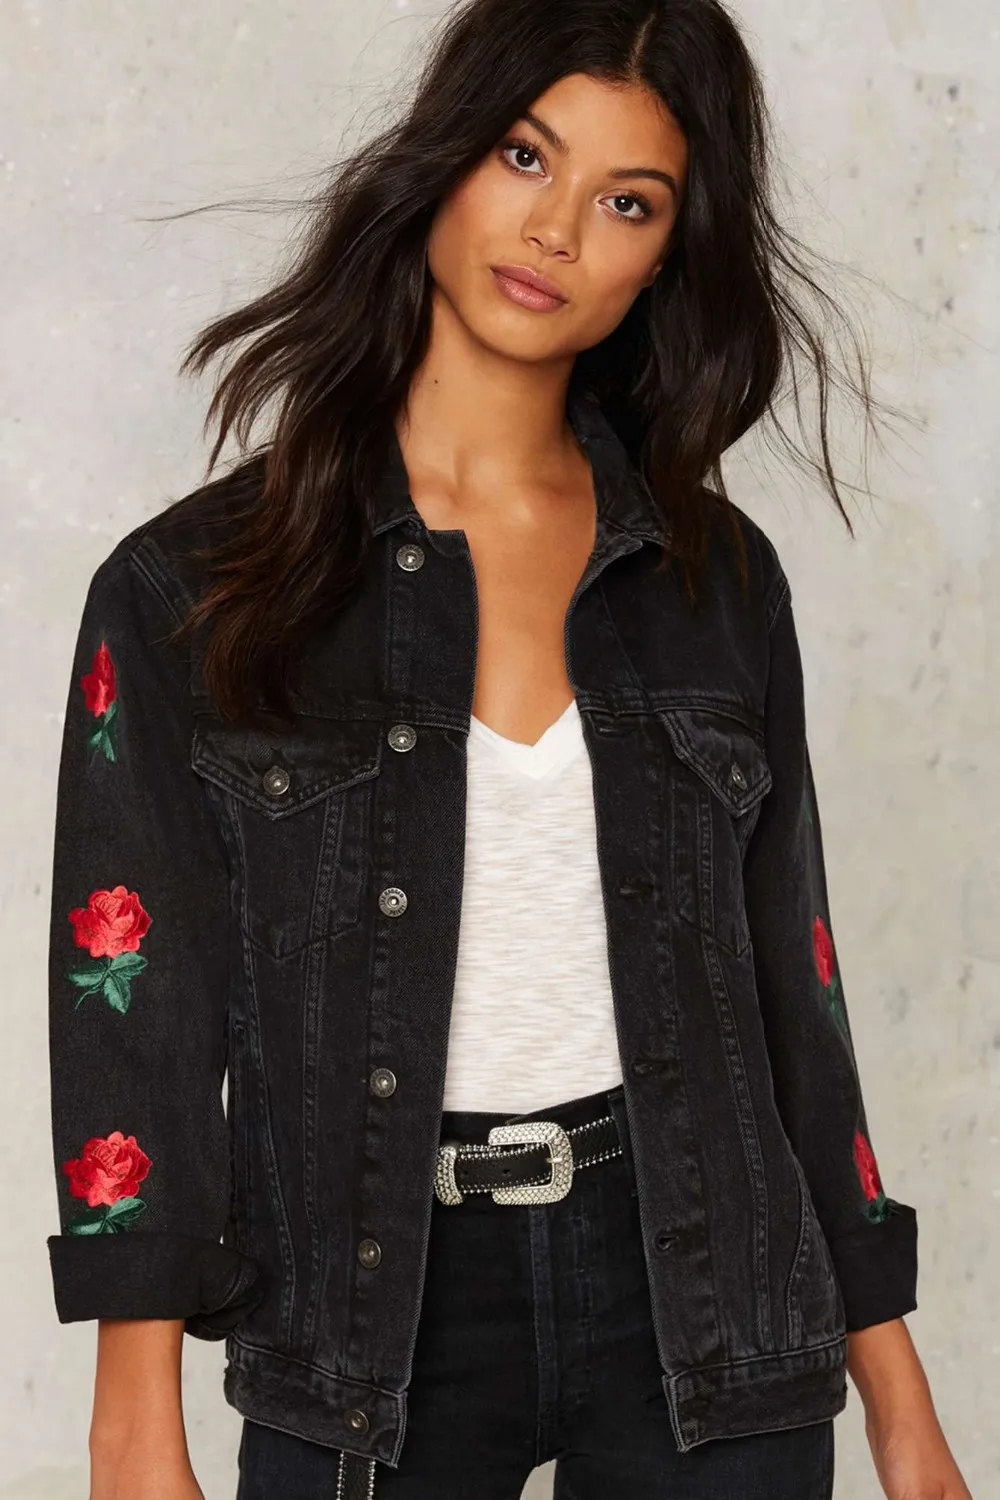 Embroidered Red Rose Patch Faded Black Denim Cool Short Jacket For ...